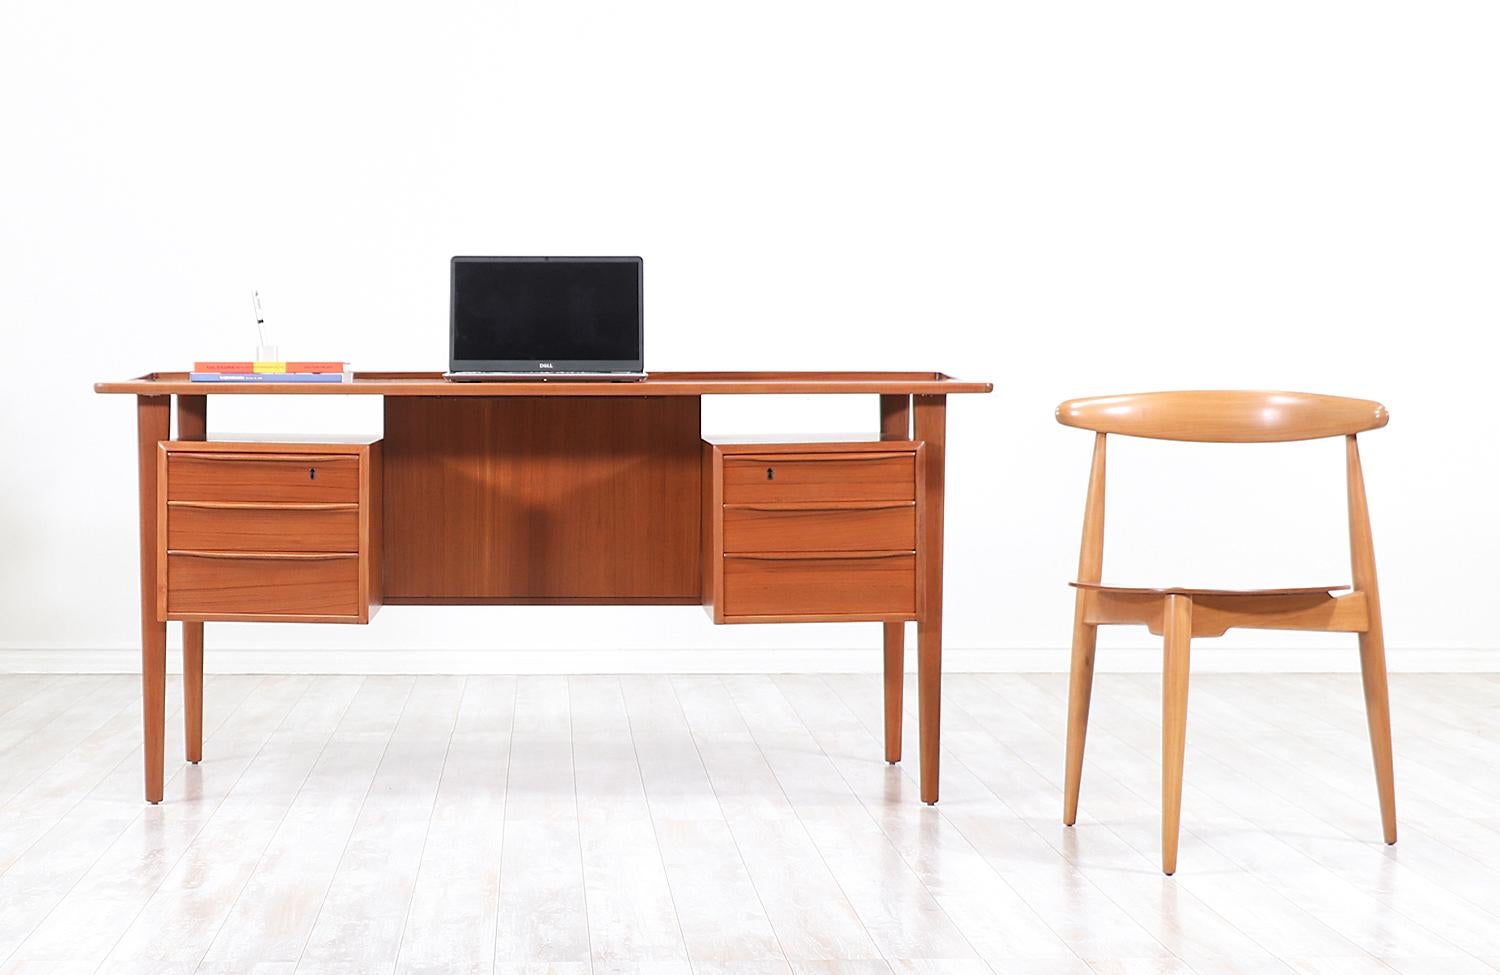 Elegant modern executive desk designed and manufactured by Peter Løvig Nielsen in Denmark, circa 1970s. This stunning freestanding teak wood desk features sturdy construction with three drawers on each side and a fully finished open back with a